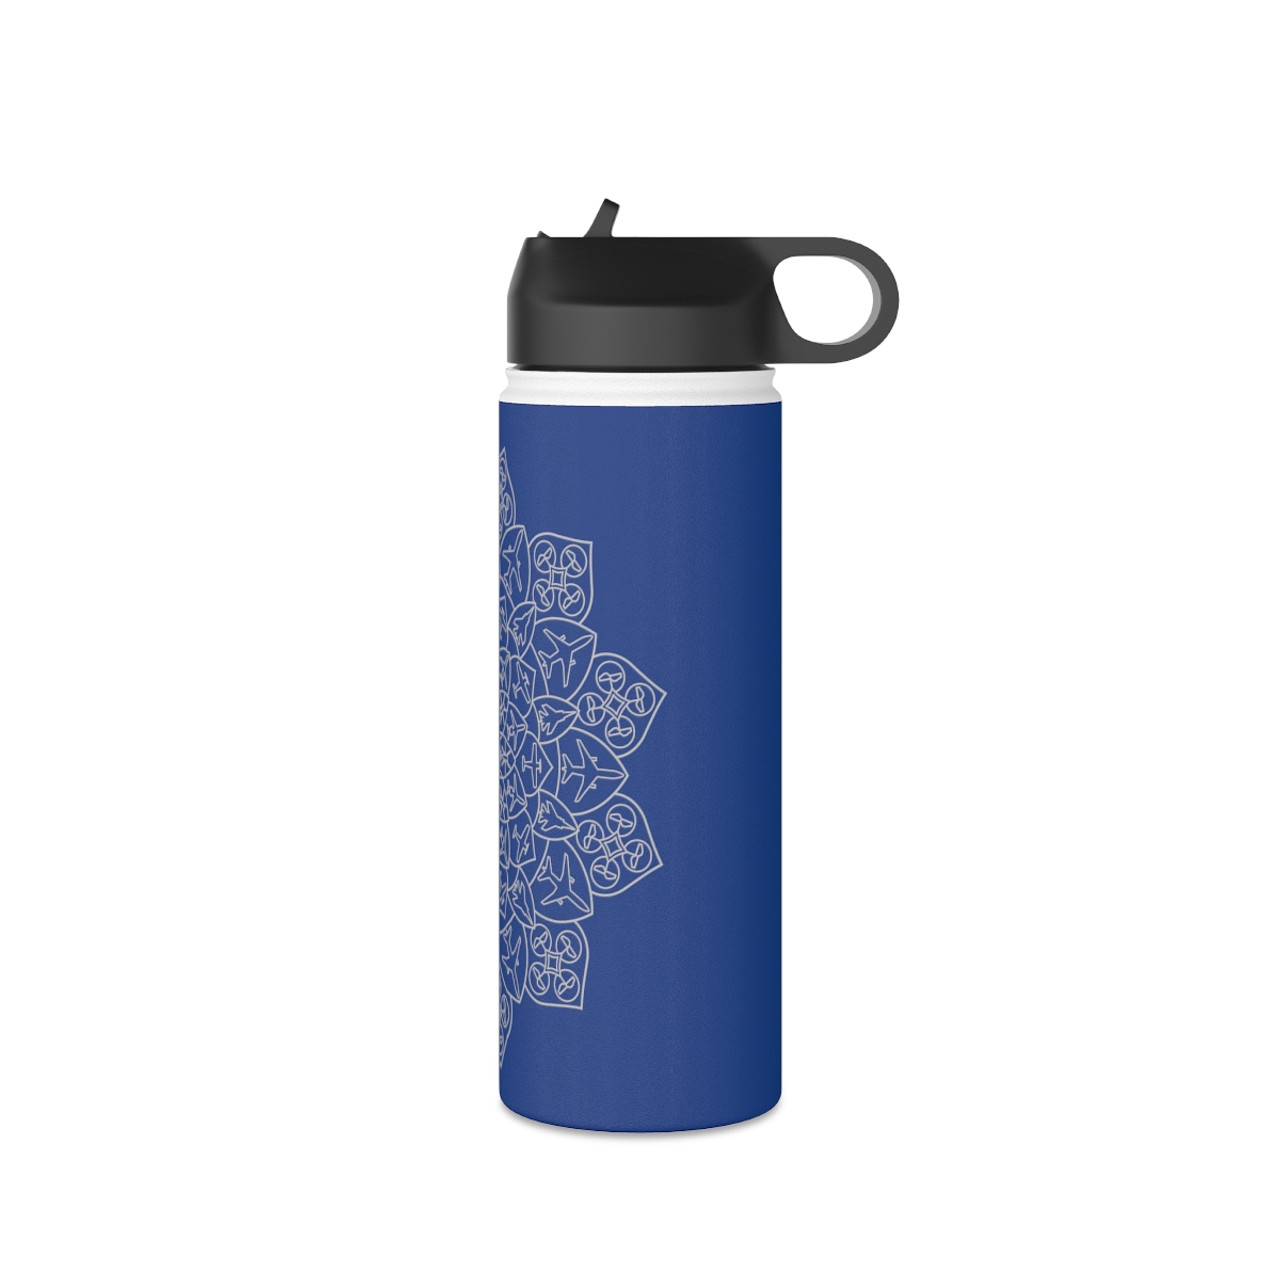 https://cdn11.bigcommerce.com/s-sqlllpksfp/images/stencil/1280x1280/products/216/807/18-oz-double-wall-stainless-steel-water-bottle__91824.1696437887.jpg?c=1?imbypass=on